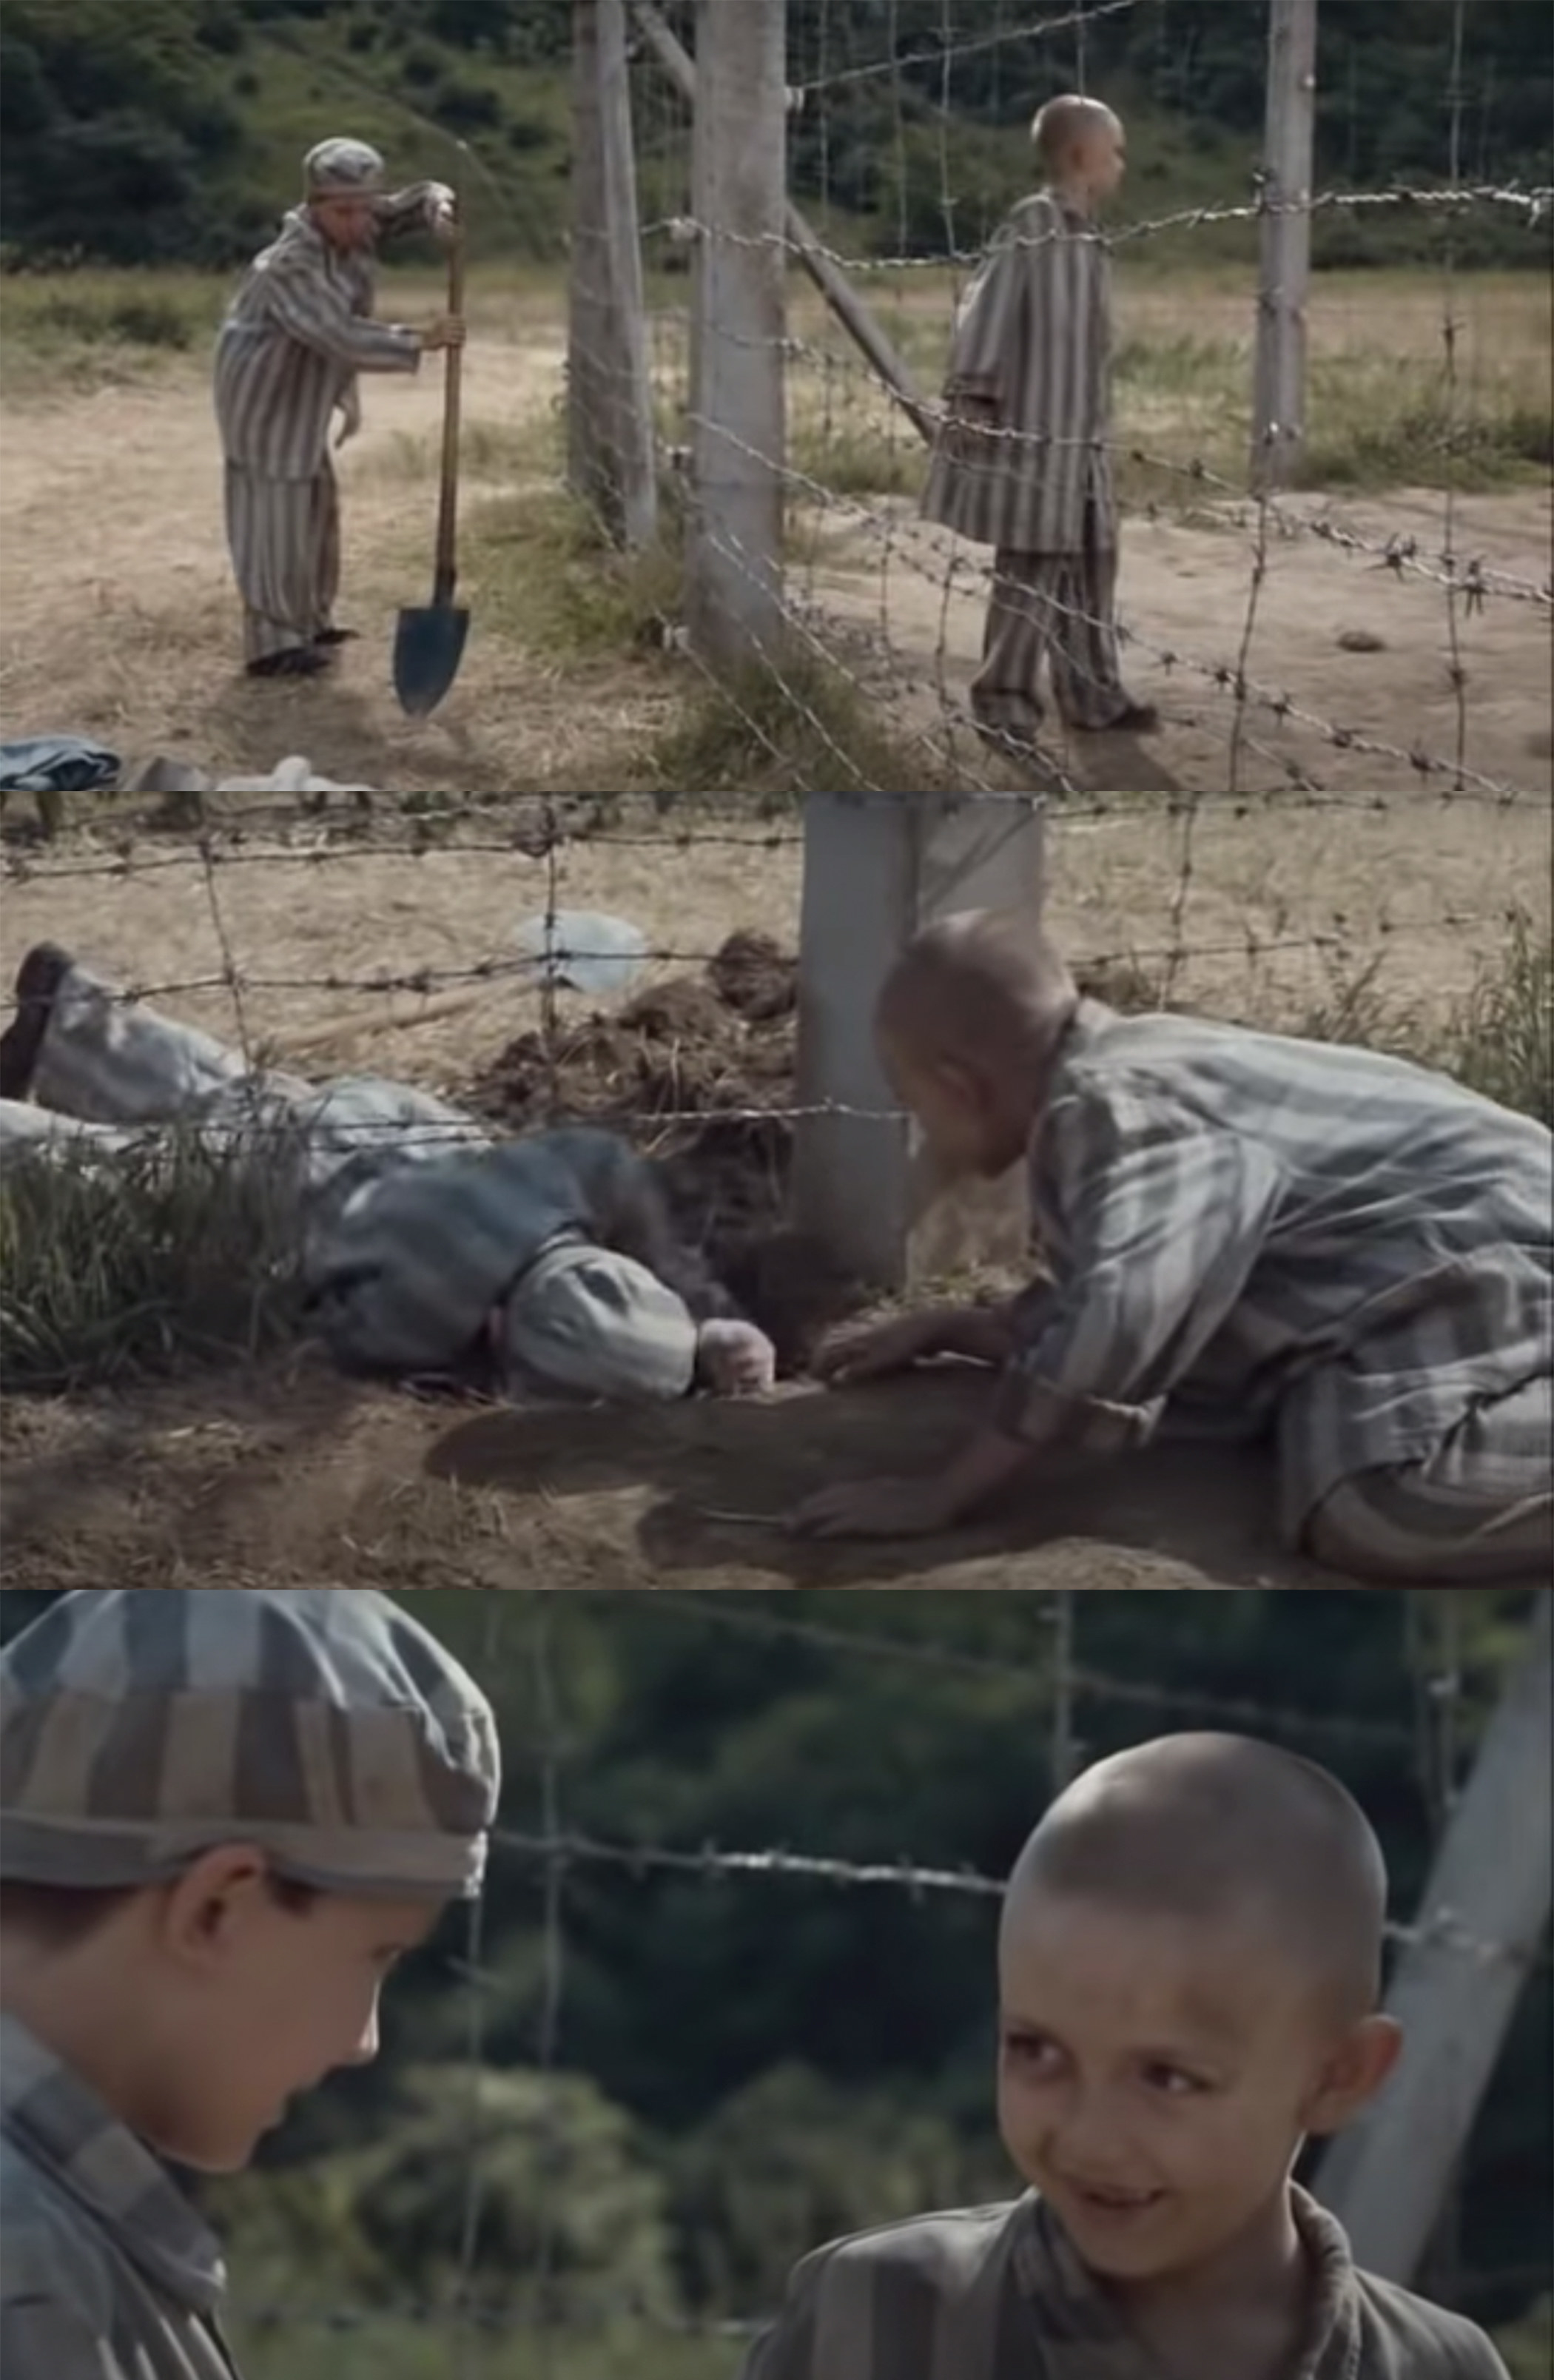 Disguising himself in striped pajamas, Asa crawls under the fence to be with Shmuel